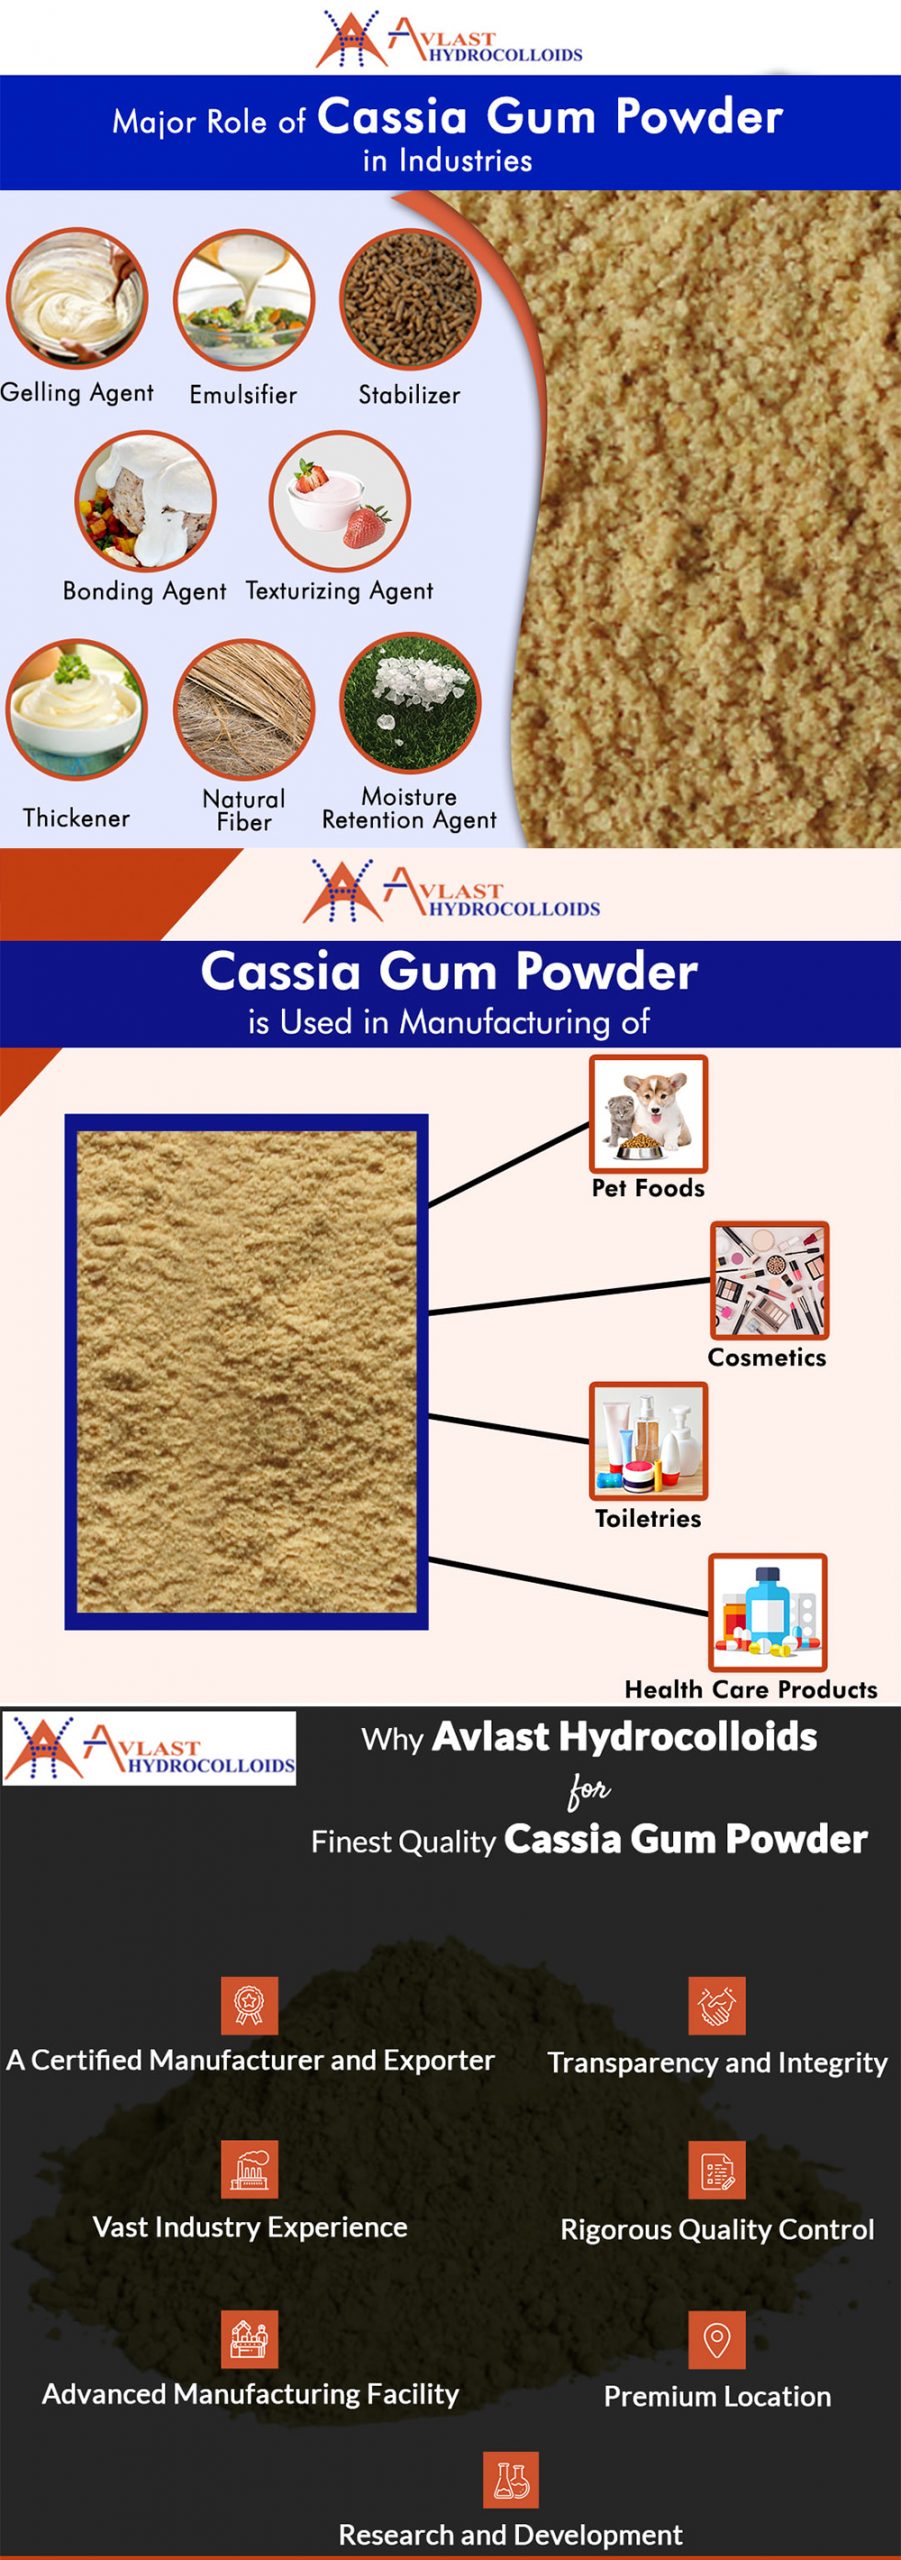 Major Role of Cassia Gum Powder in Industries